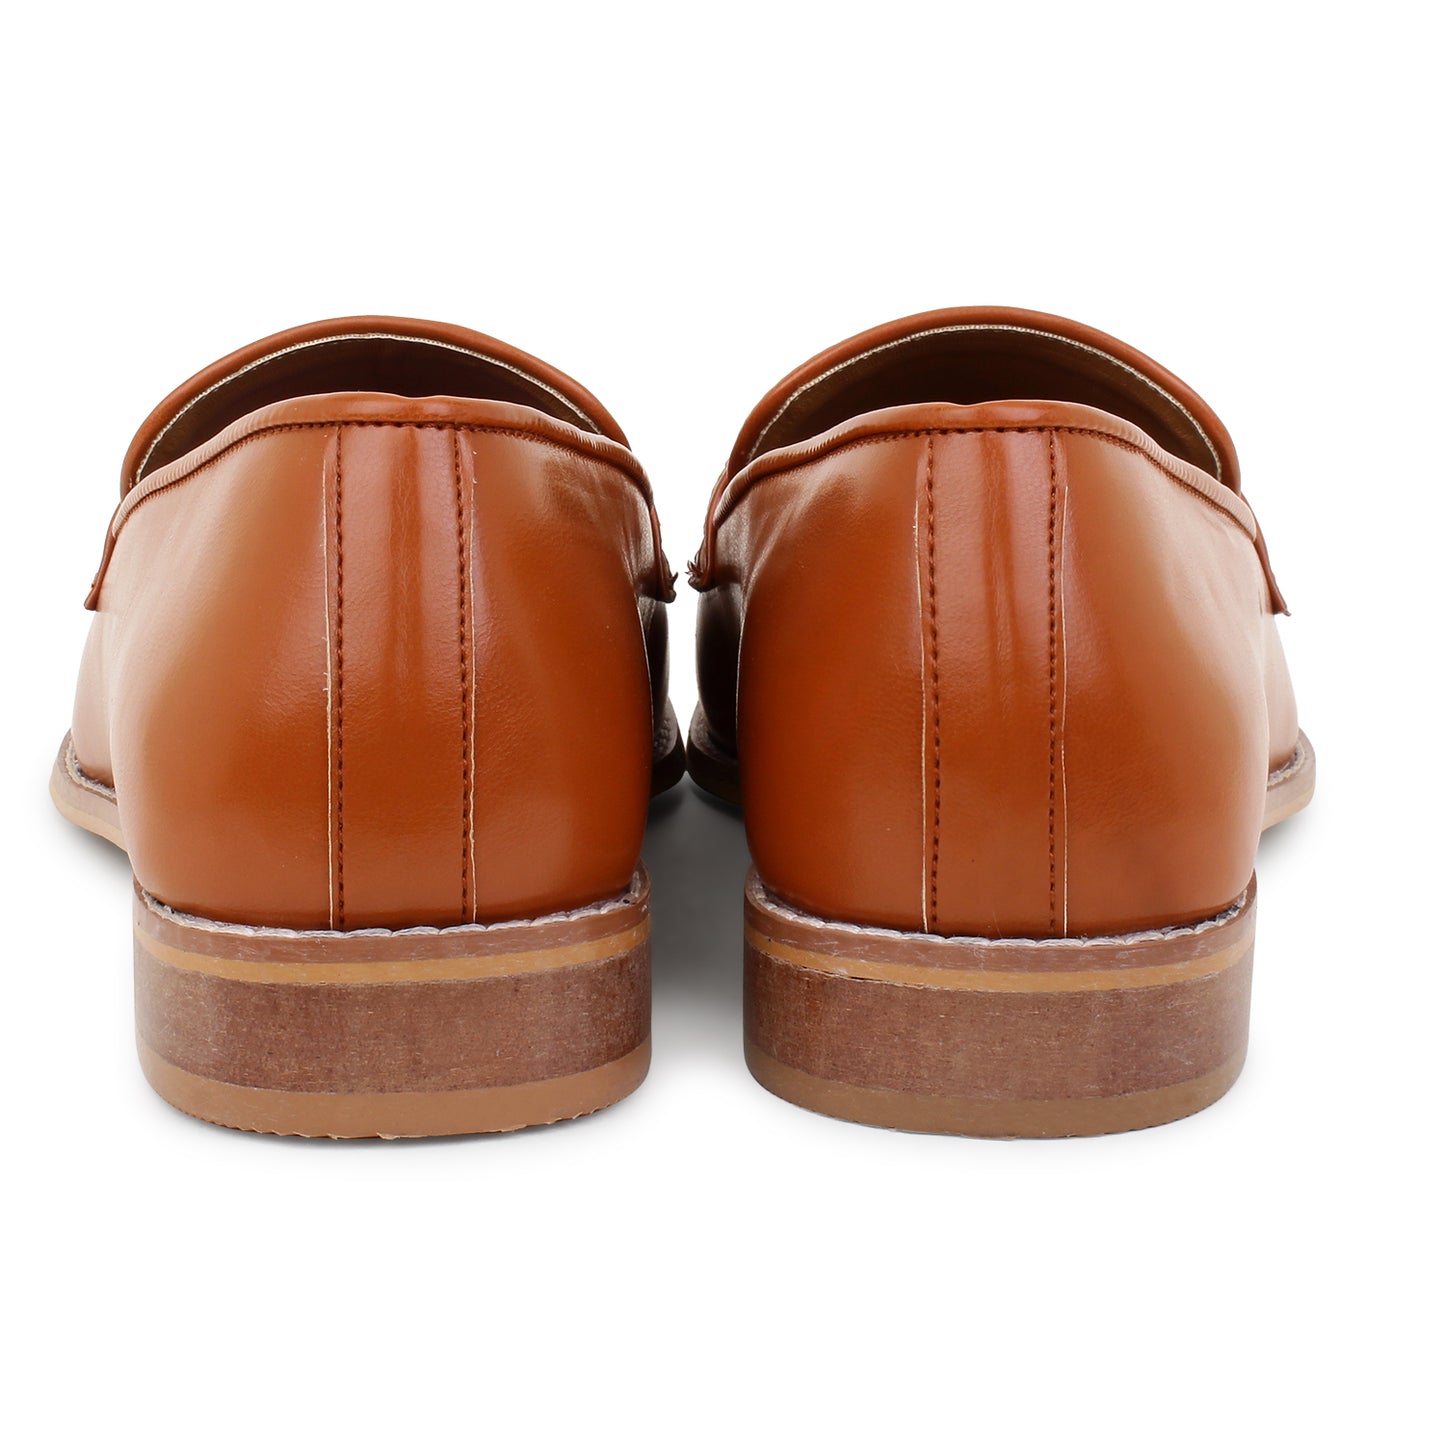 Woven Leather Slip Ons with Saddle - Tan